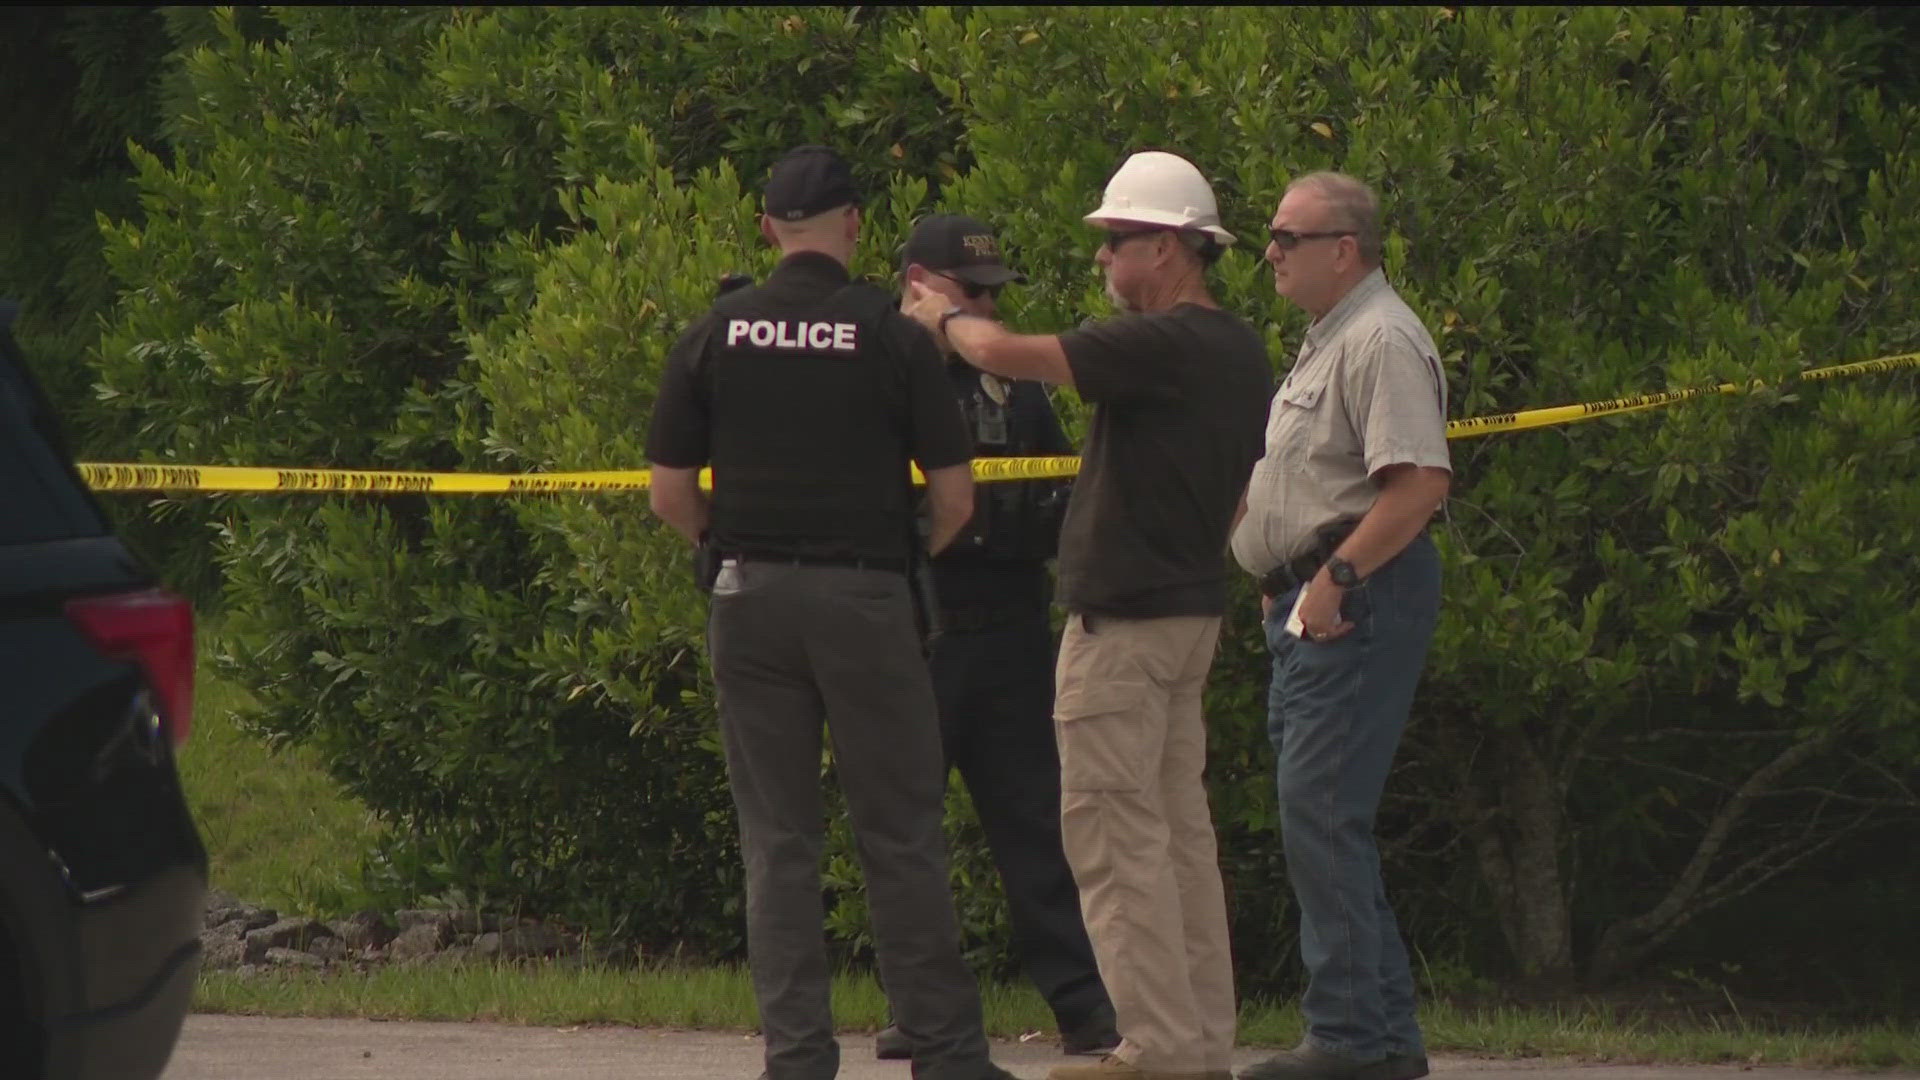 Human Remains Discovered by Berry Picker in Kennesaw